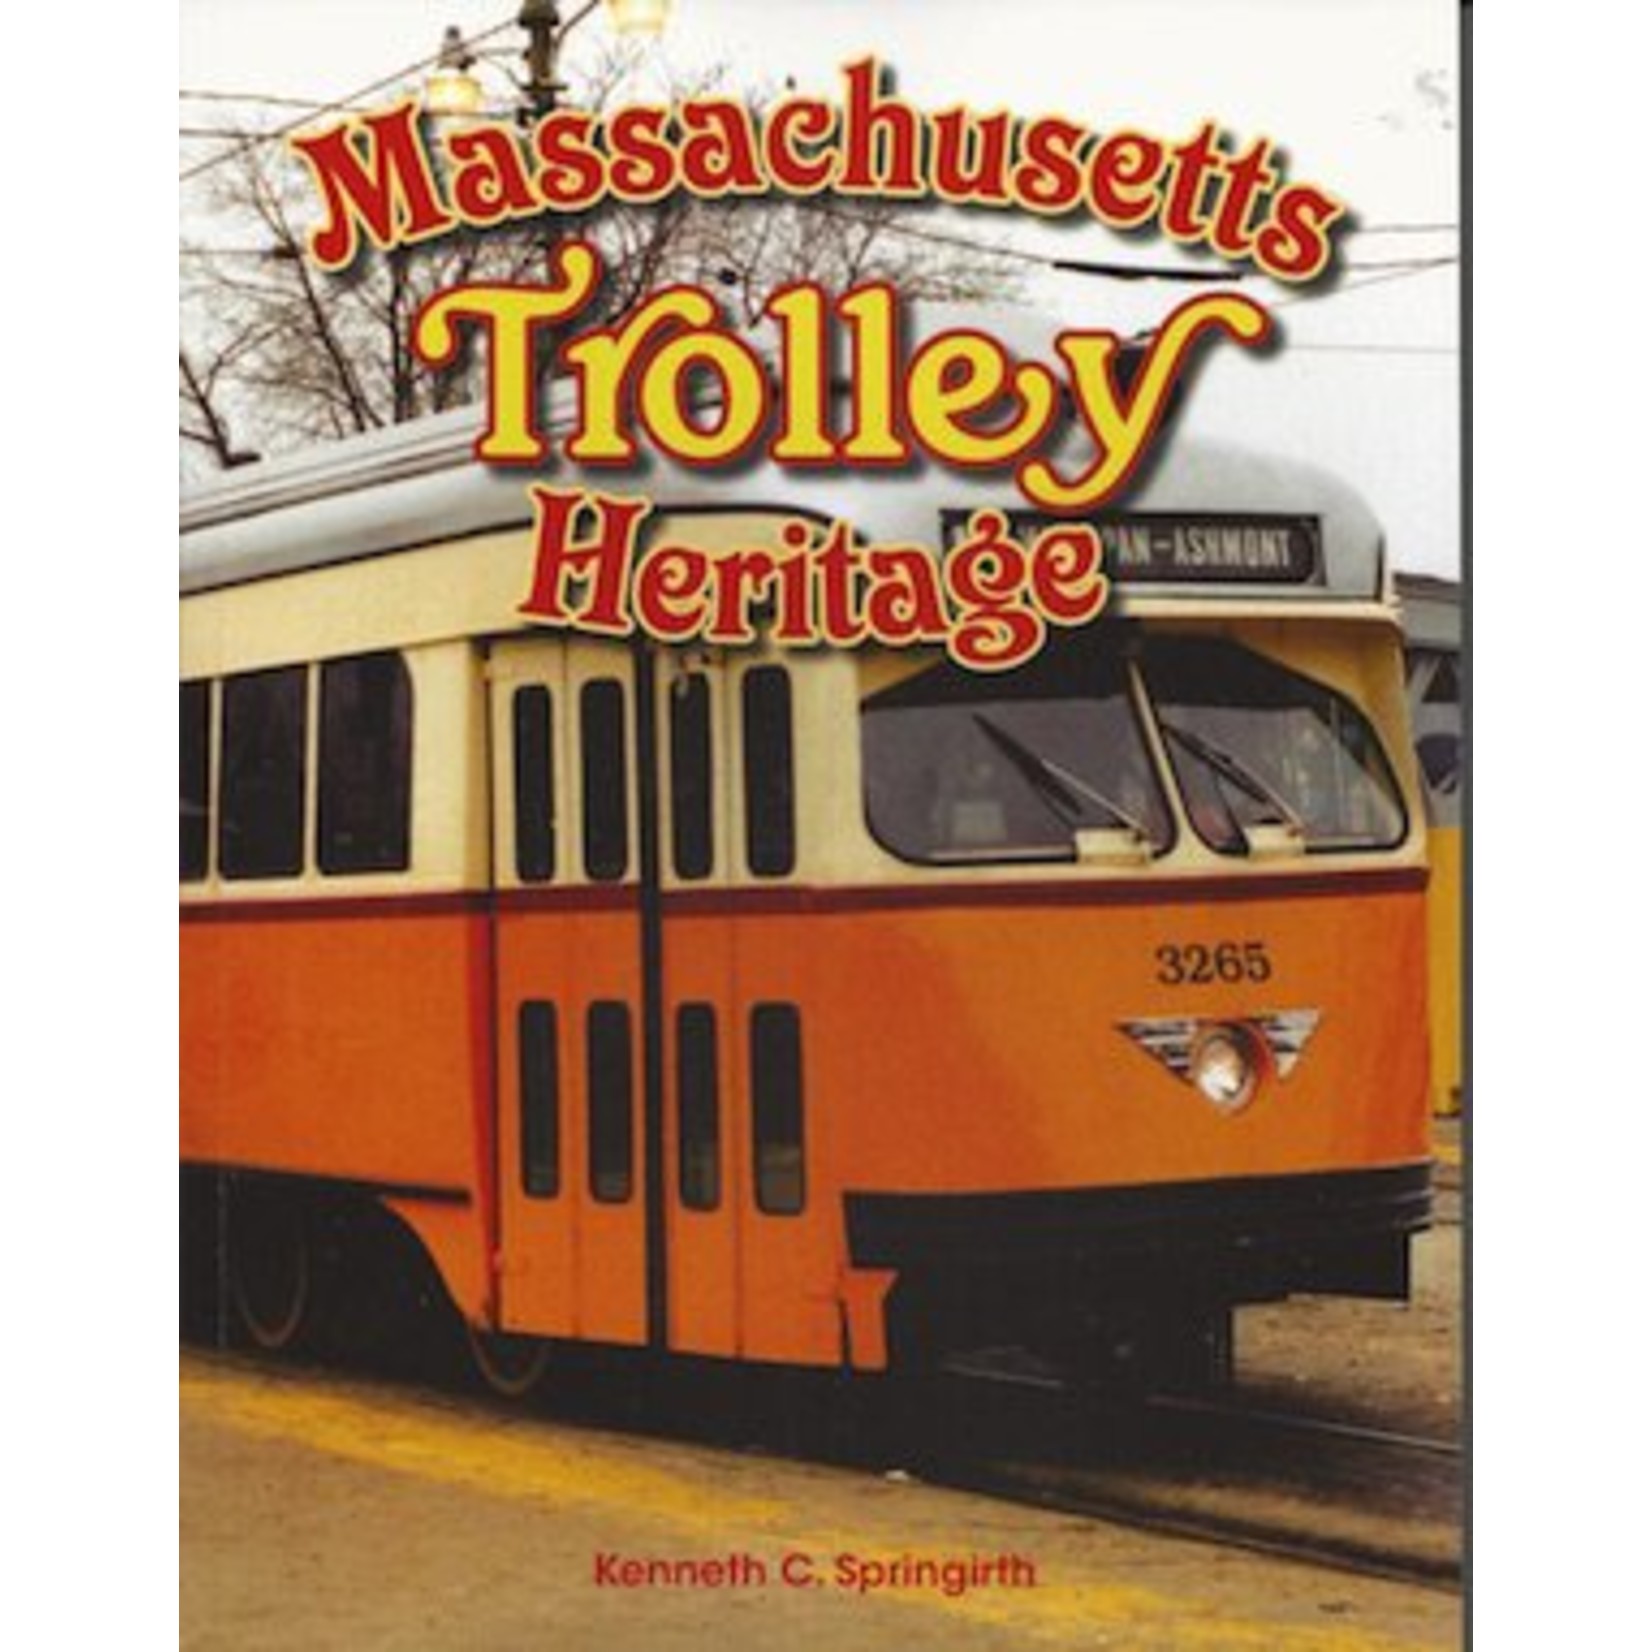 America Through Time Massachusetts Trolley Heritage *SIGNED